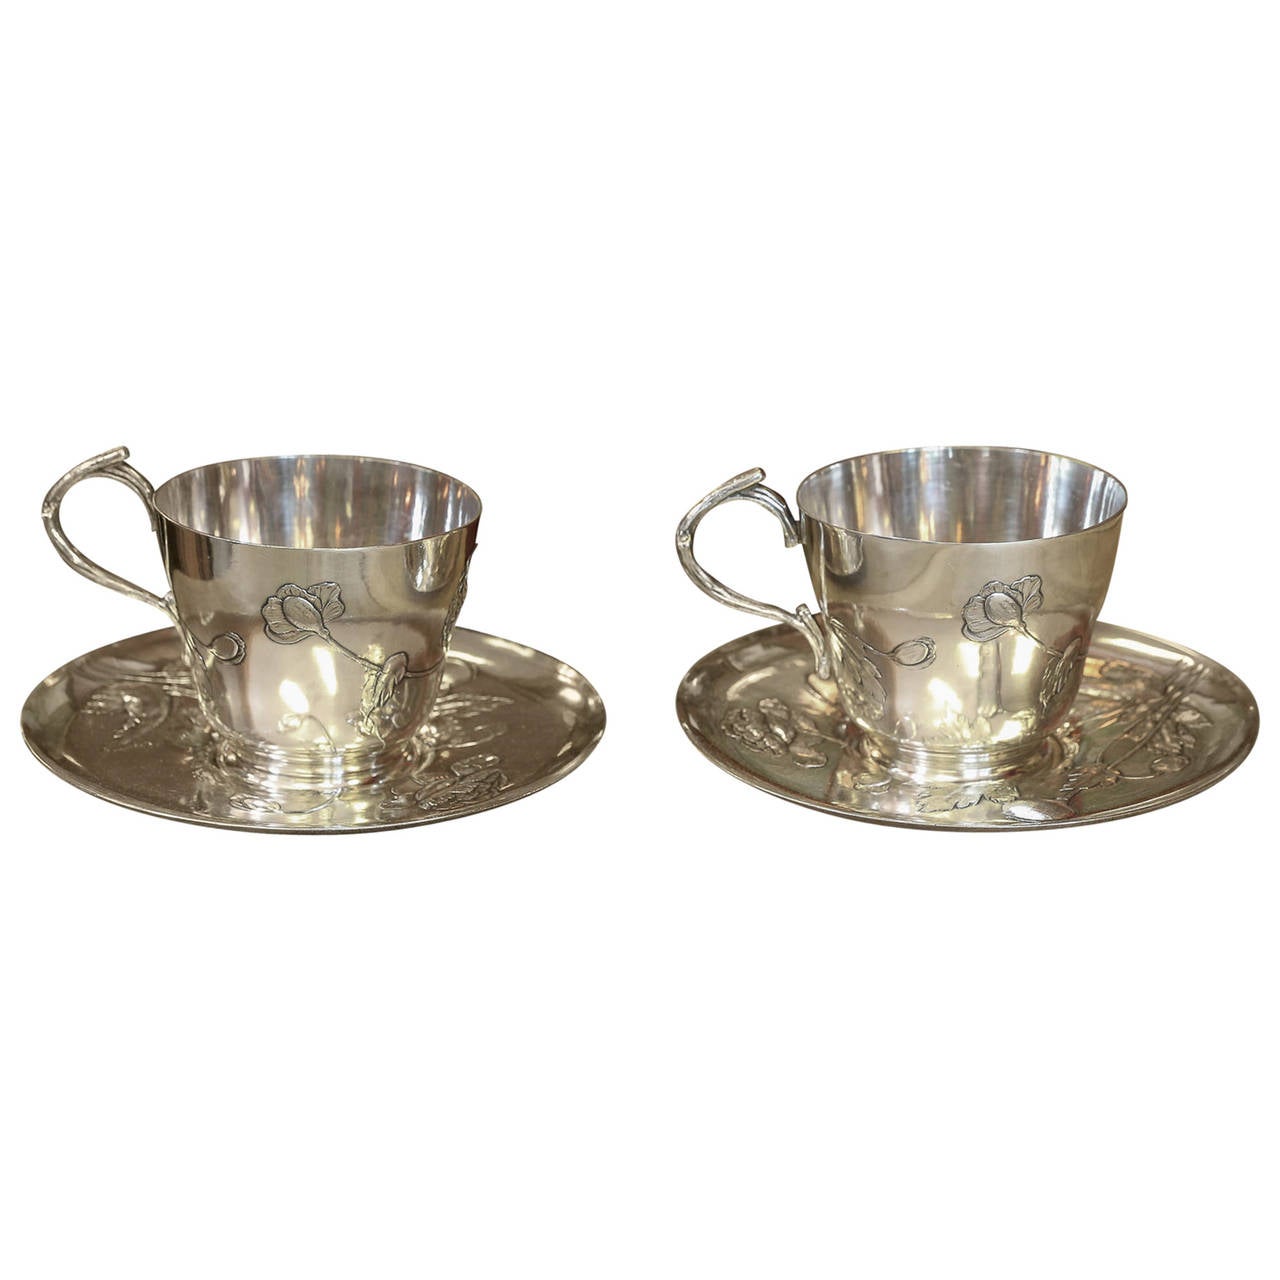 Pair of "Gallia" Art Nouveau Silverplated Cups and Saucers For Sale